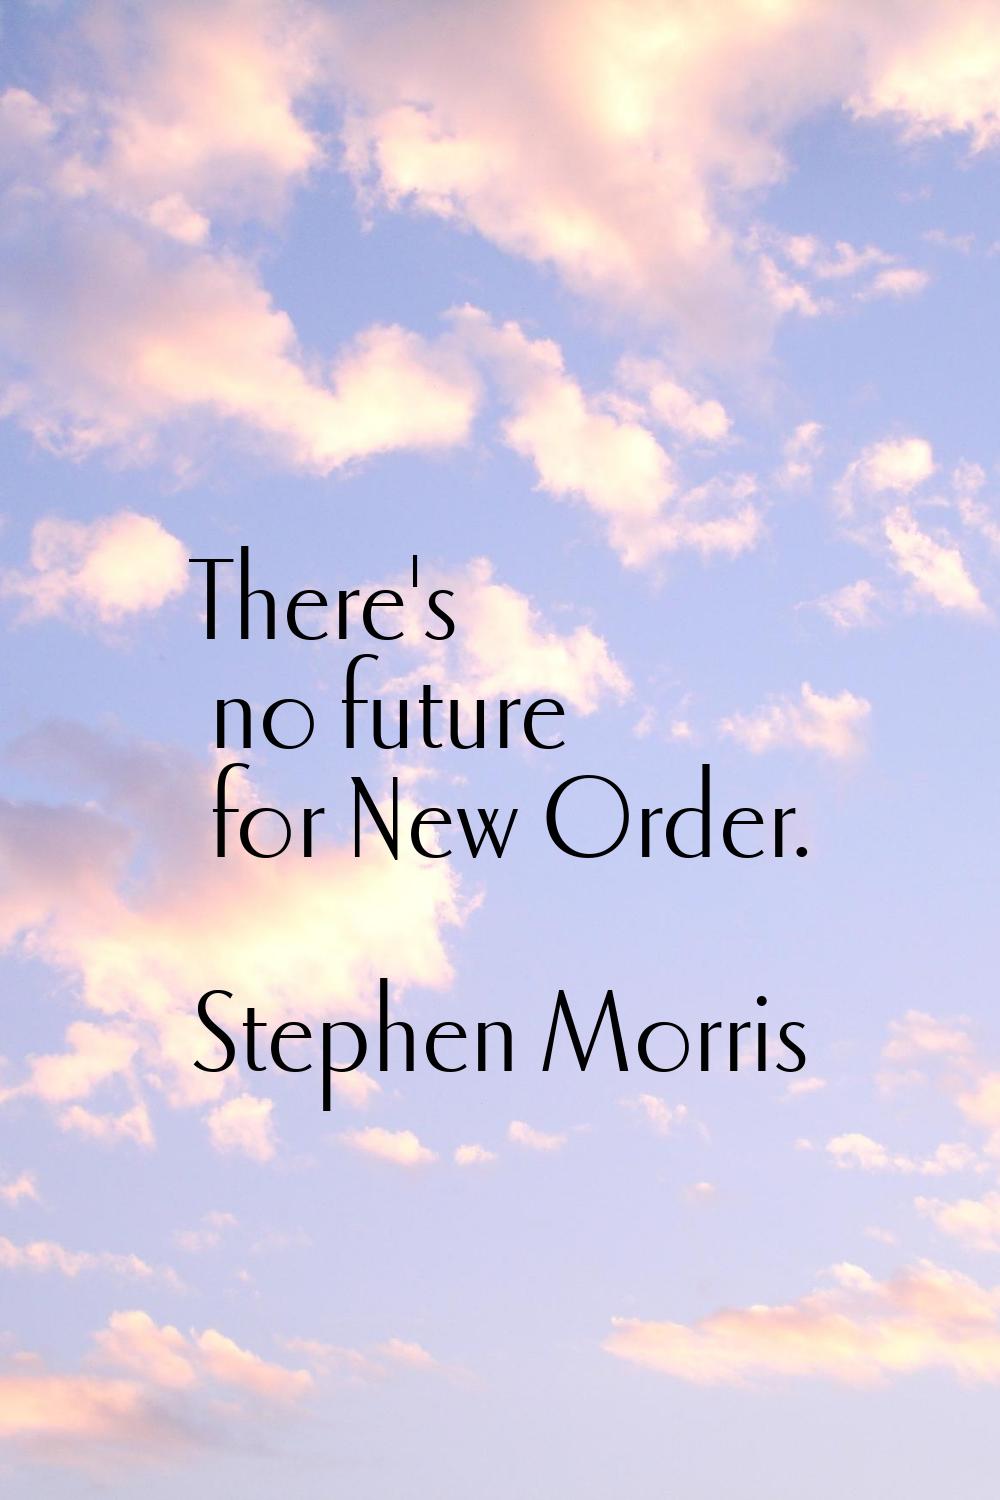 There's no future for New Order.